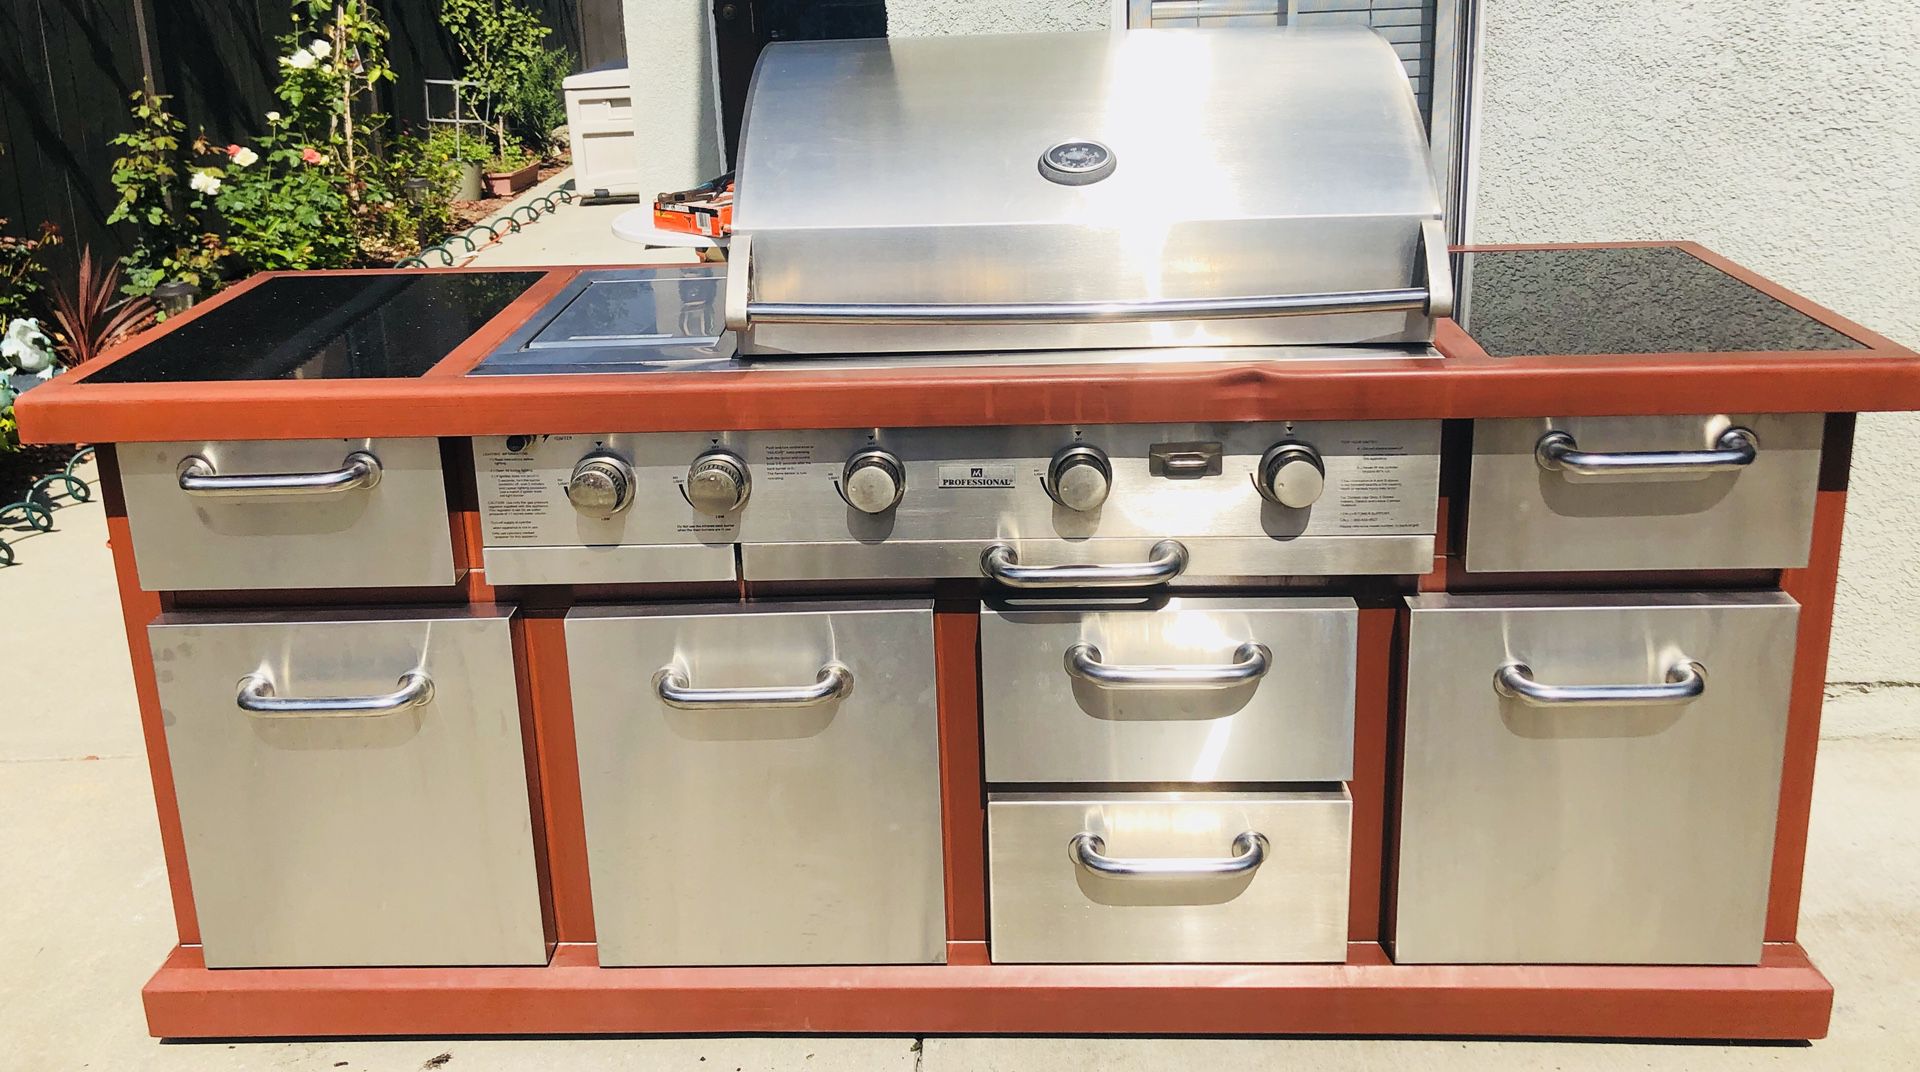 Outdoor Gourmet BQ05046-6 Gas Island BBQ Grill, 4-Burner with built-in drink cooler and rotisserie